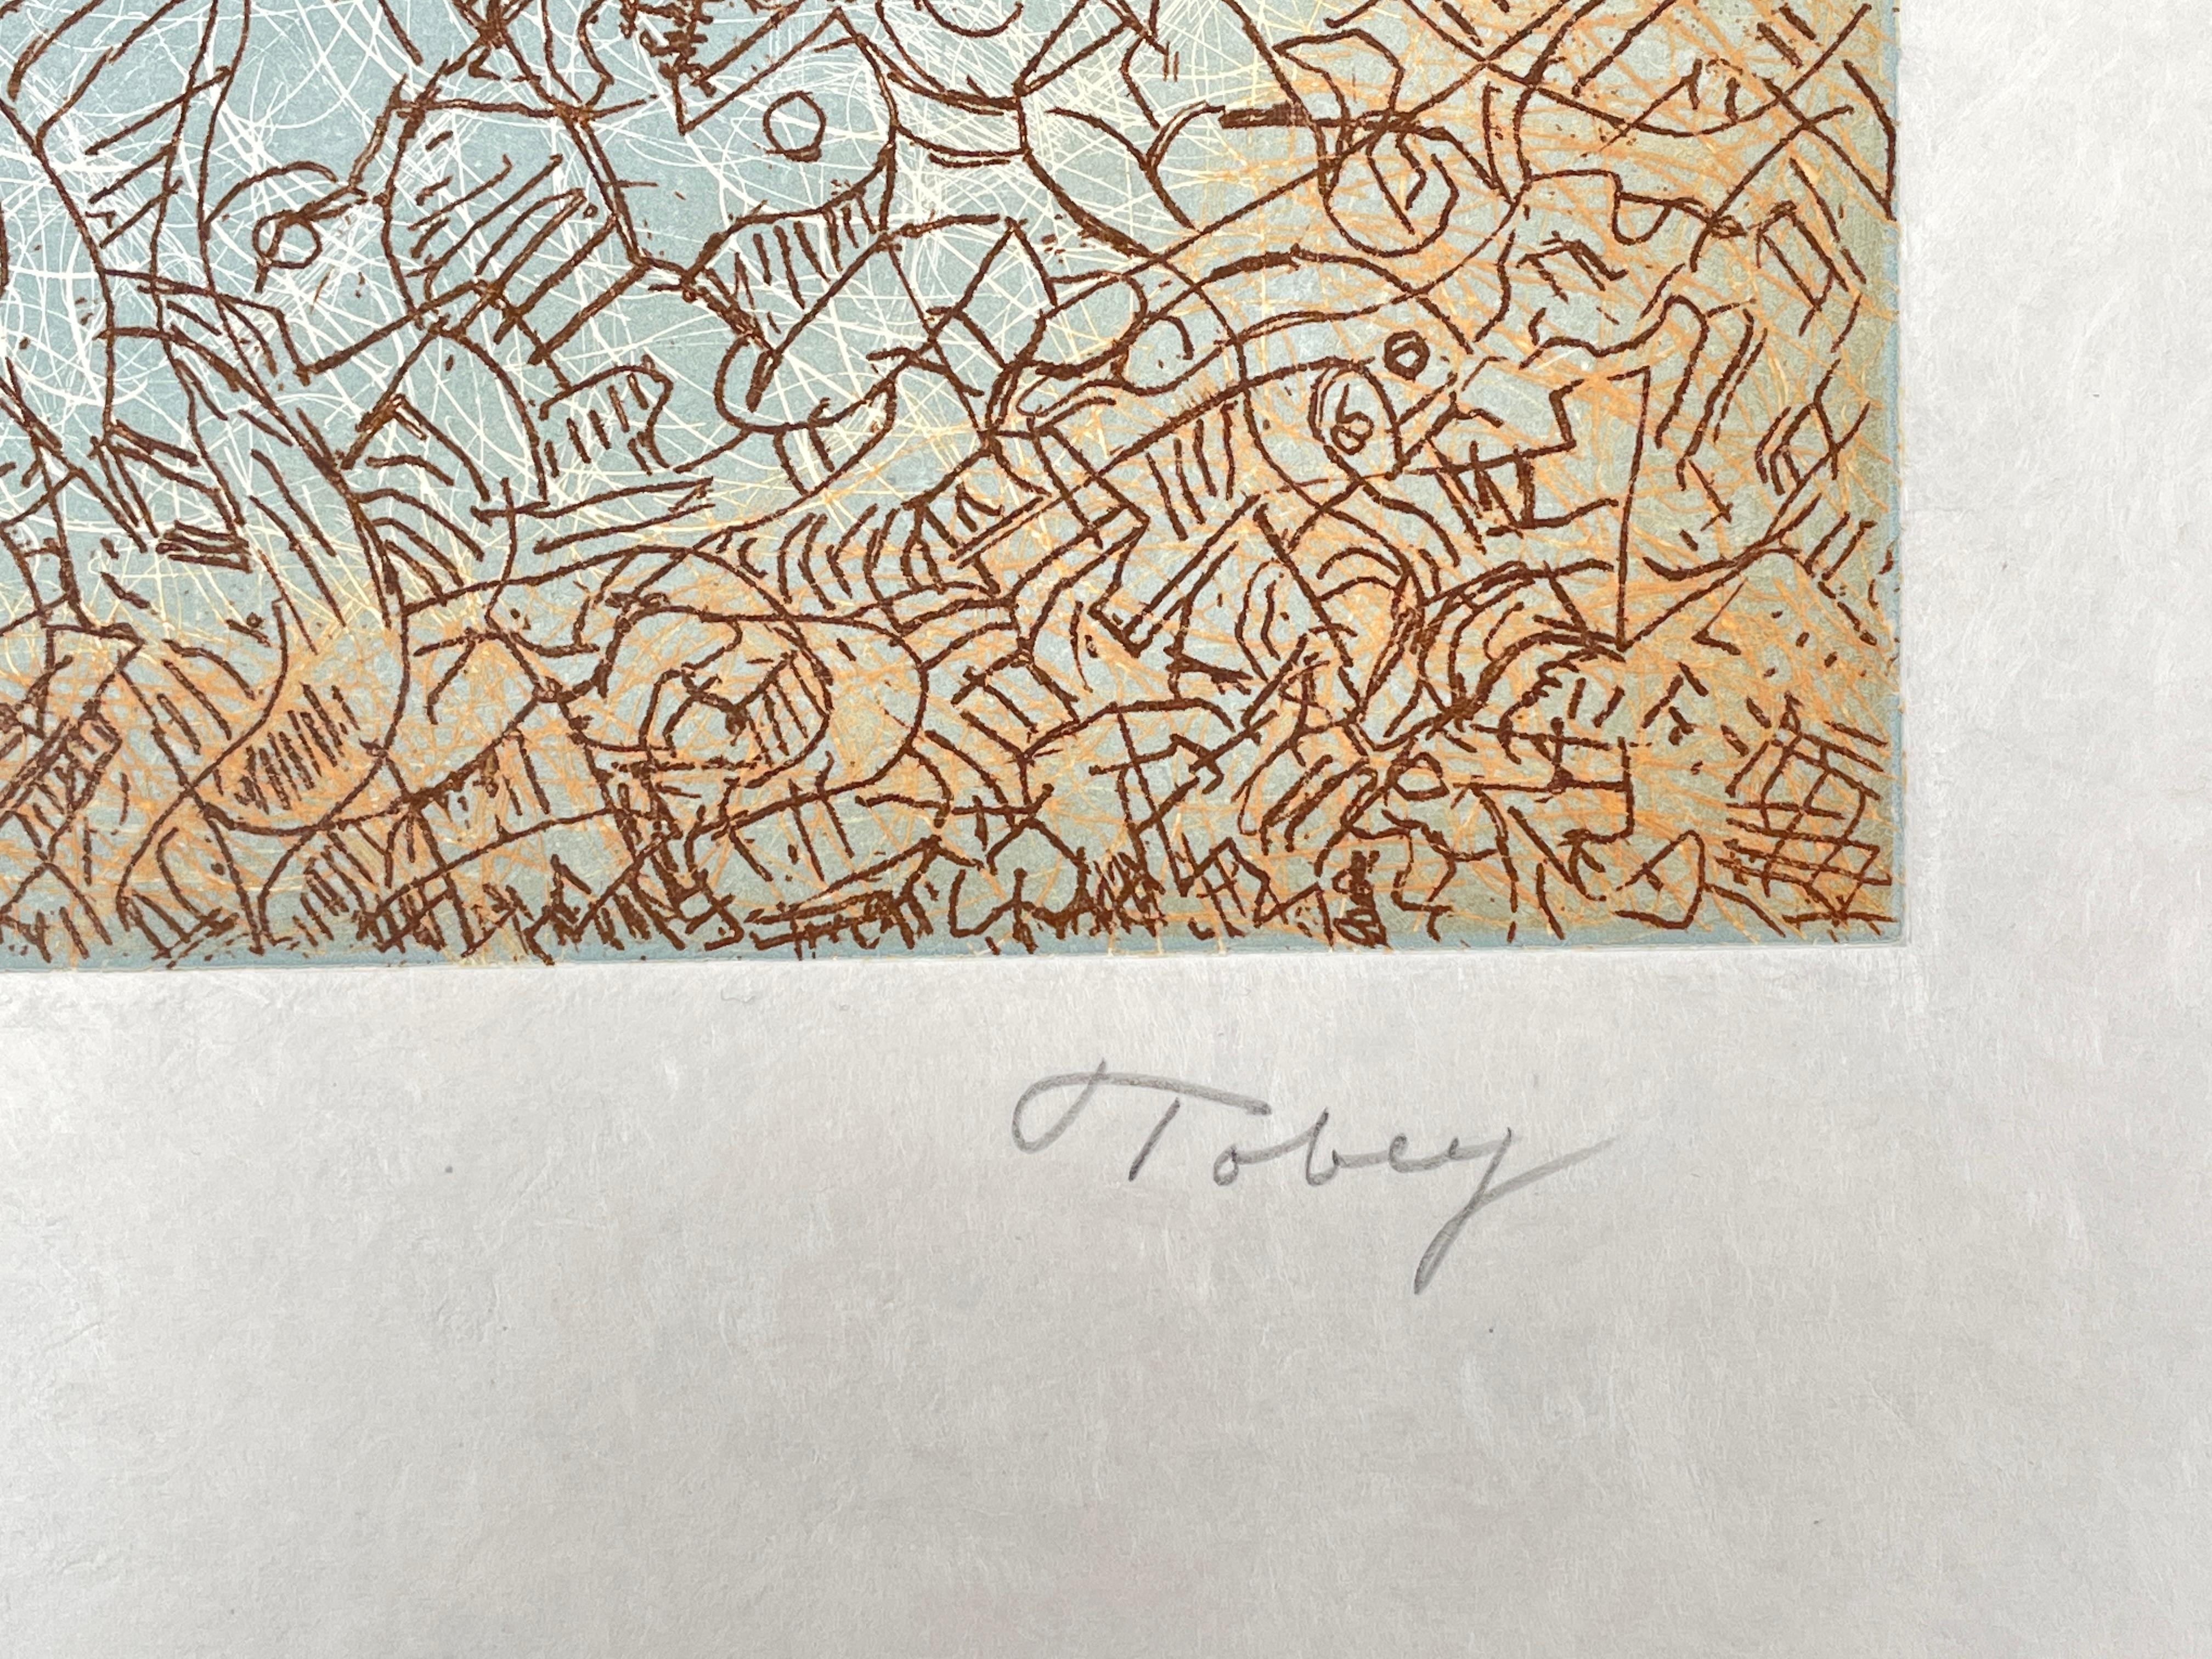 Mark Tobey | TO LIFE (HOMAGE TO TOBEY) (1974) | MutualArt